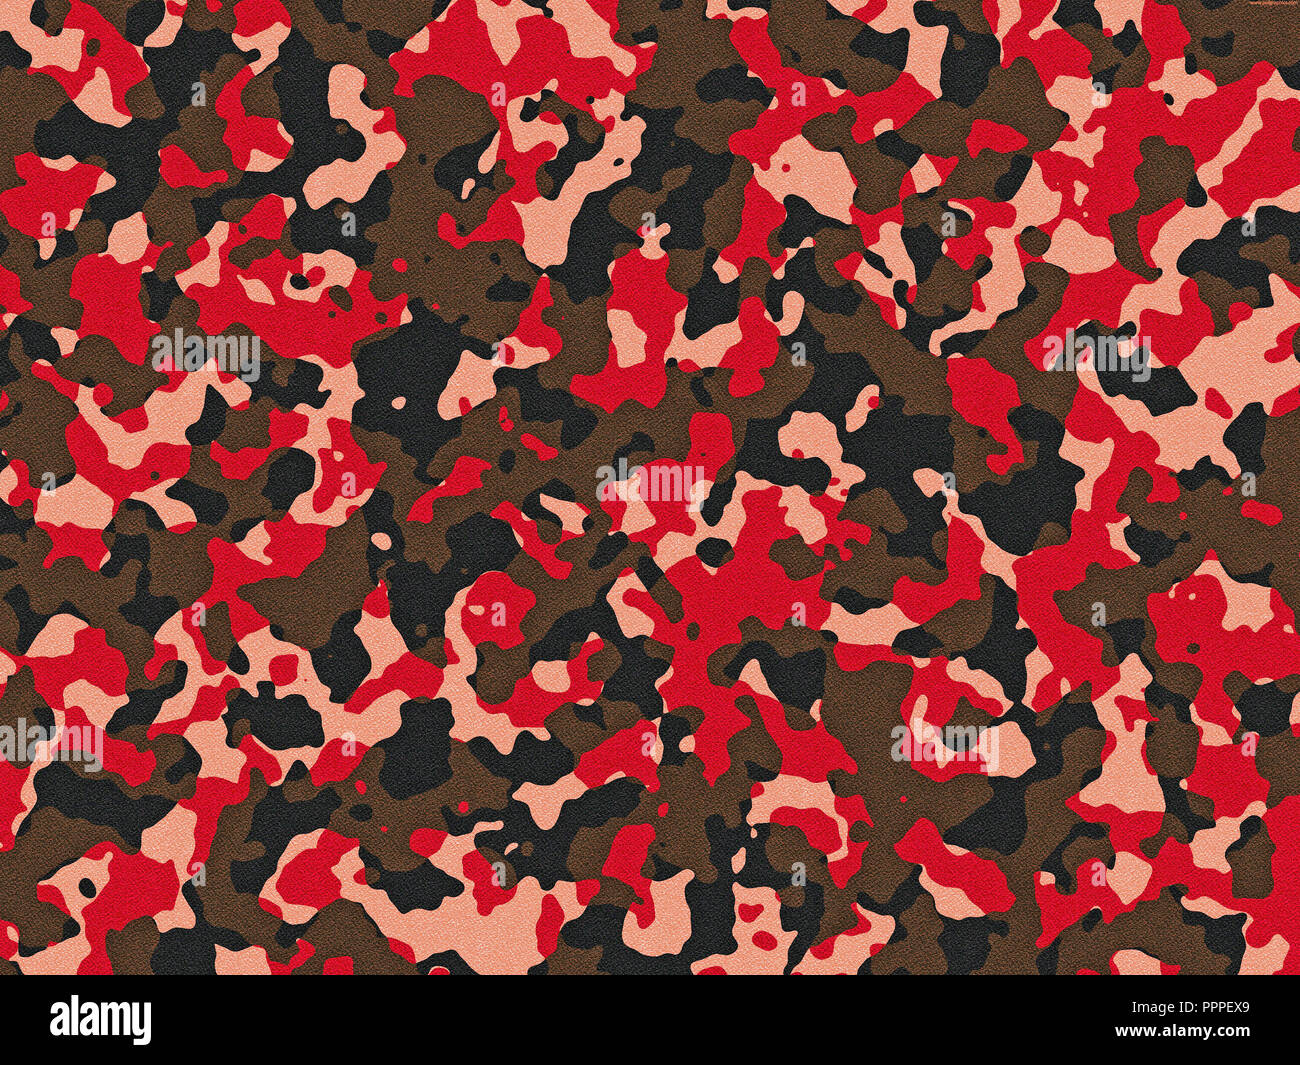 Textured red and brown camouflage pattern Stock Photo